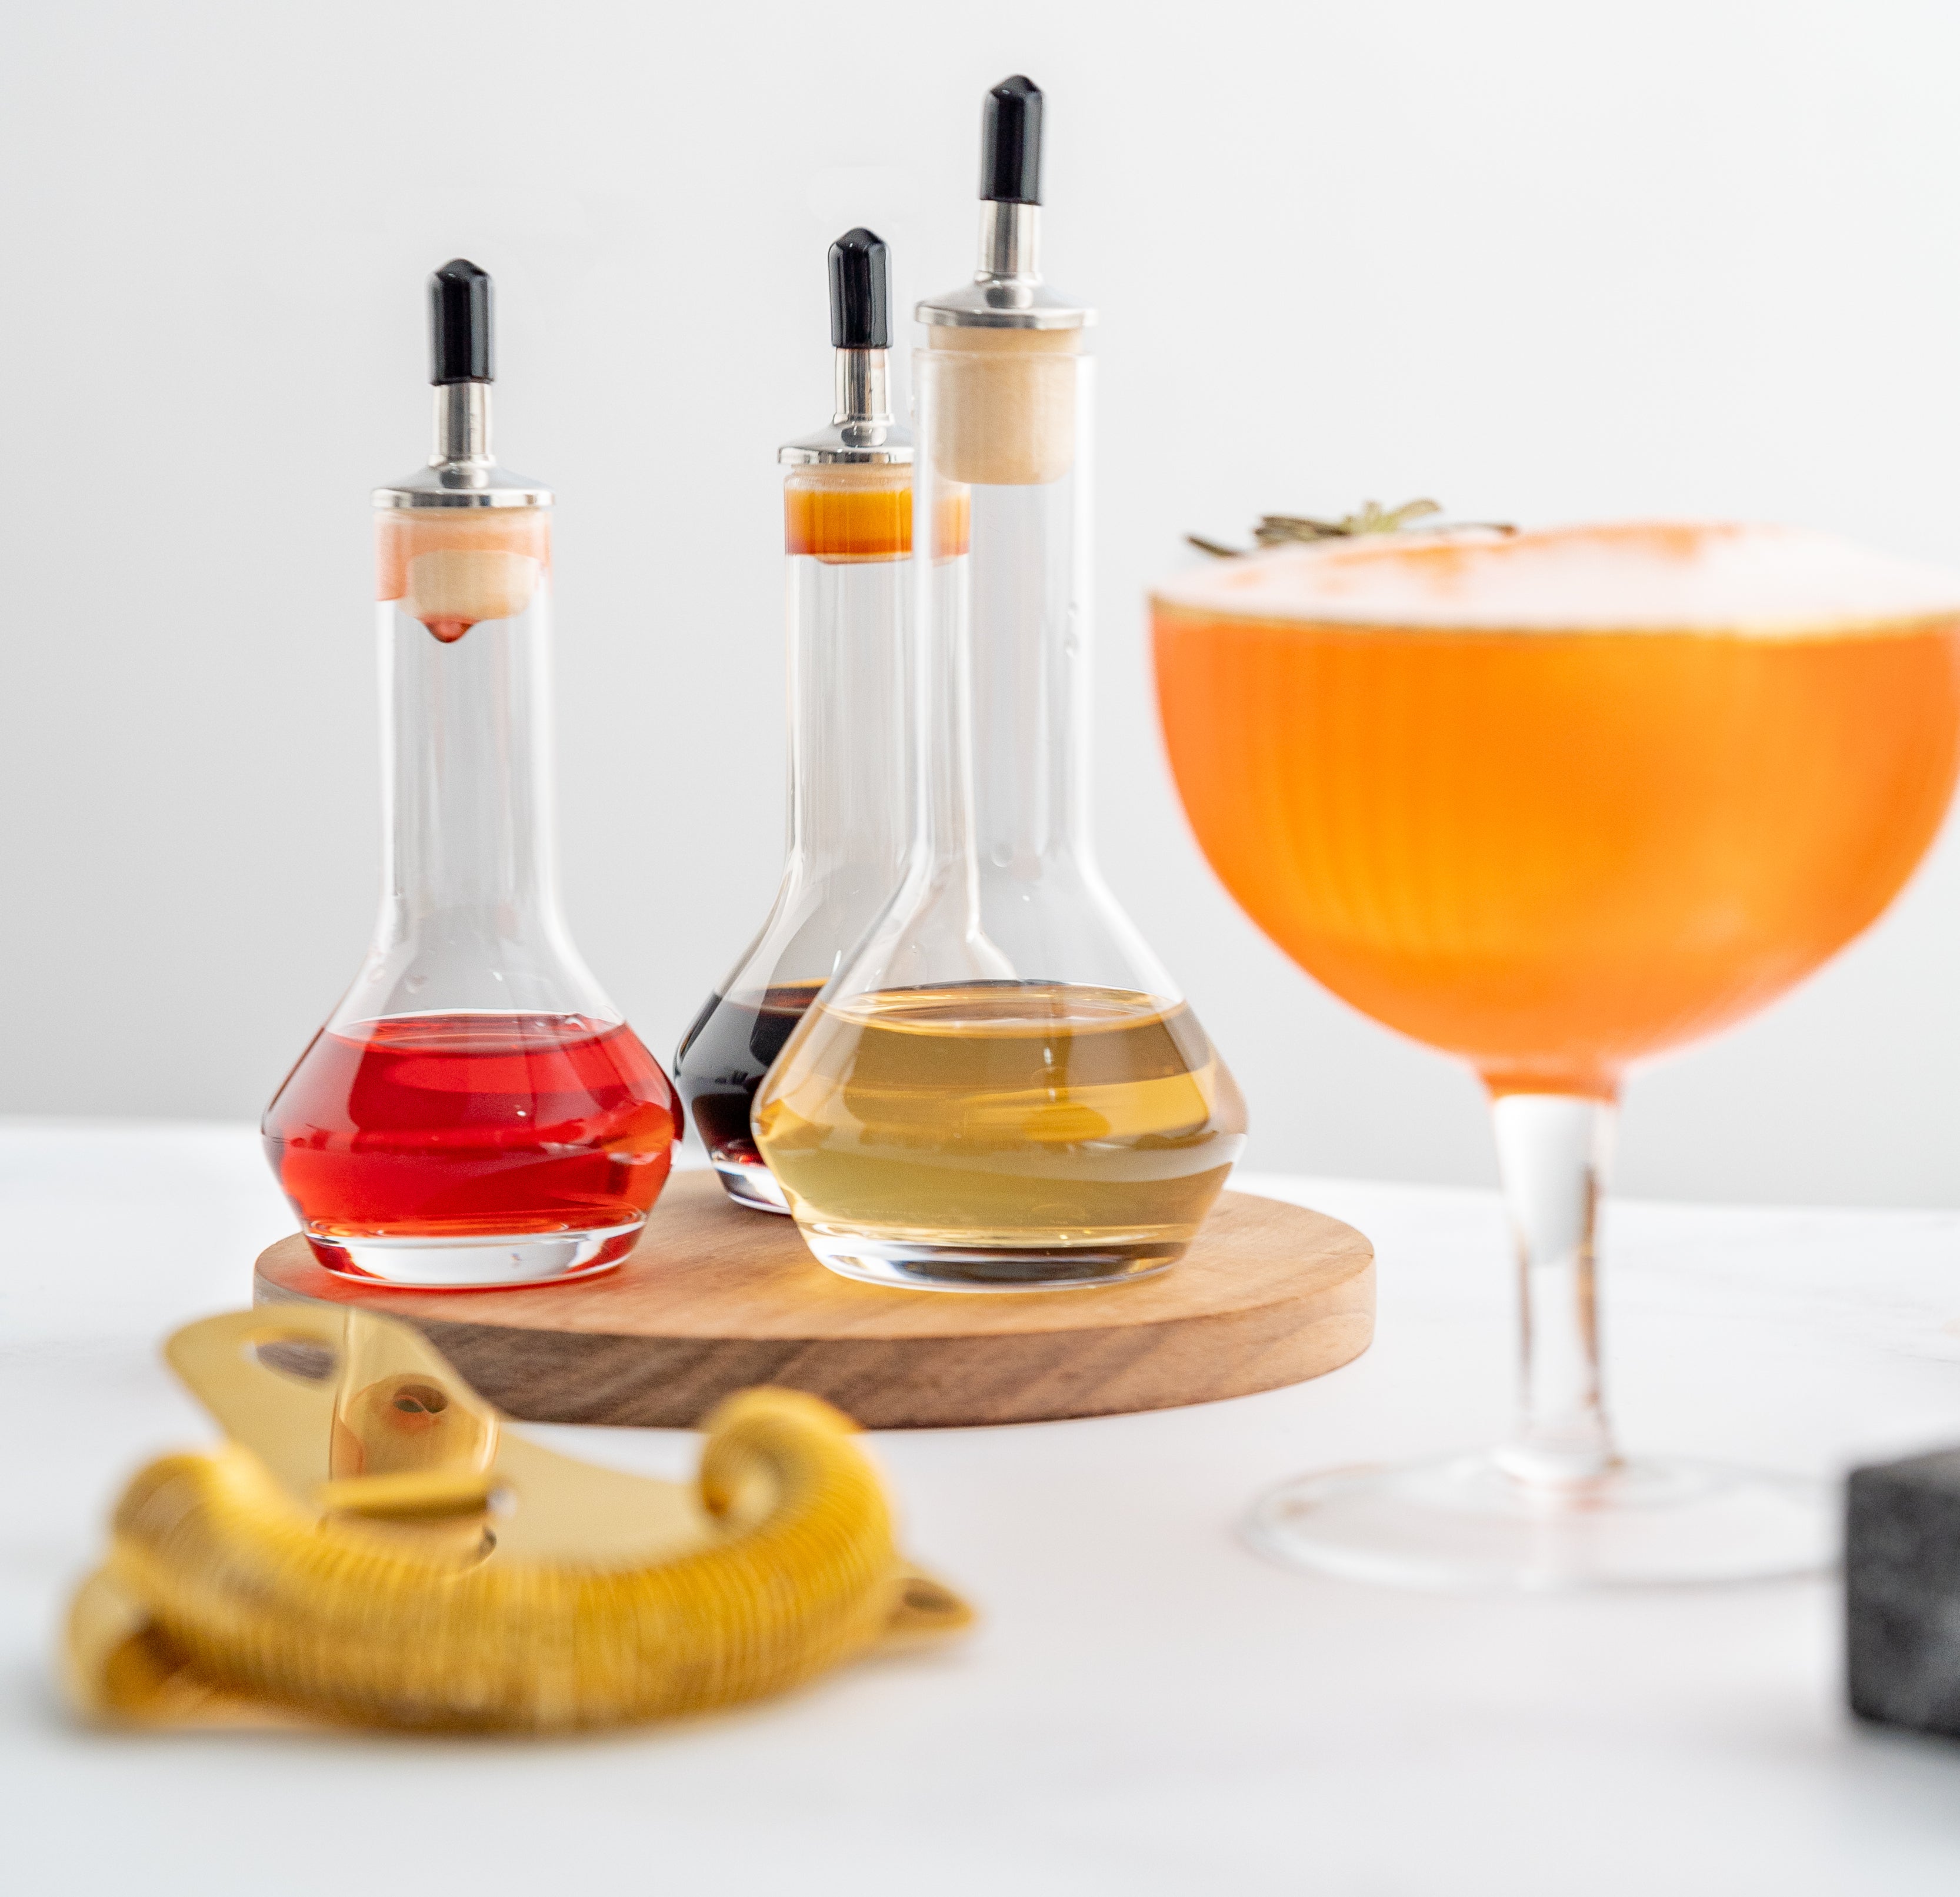 3 clear bitters bottles with round bottoms filled with liquid, with blurred out orange cocktail and gold strainer in the foreground